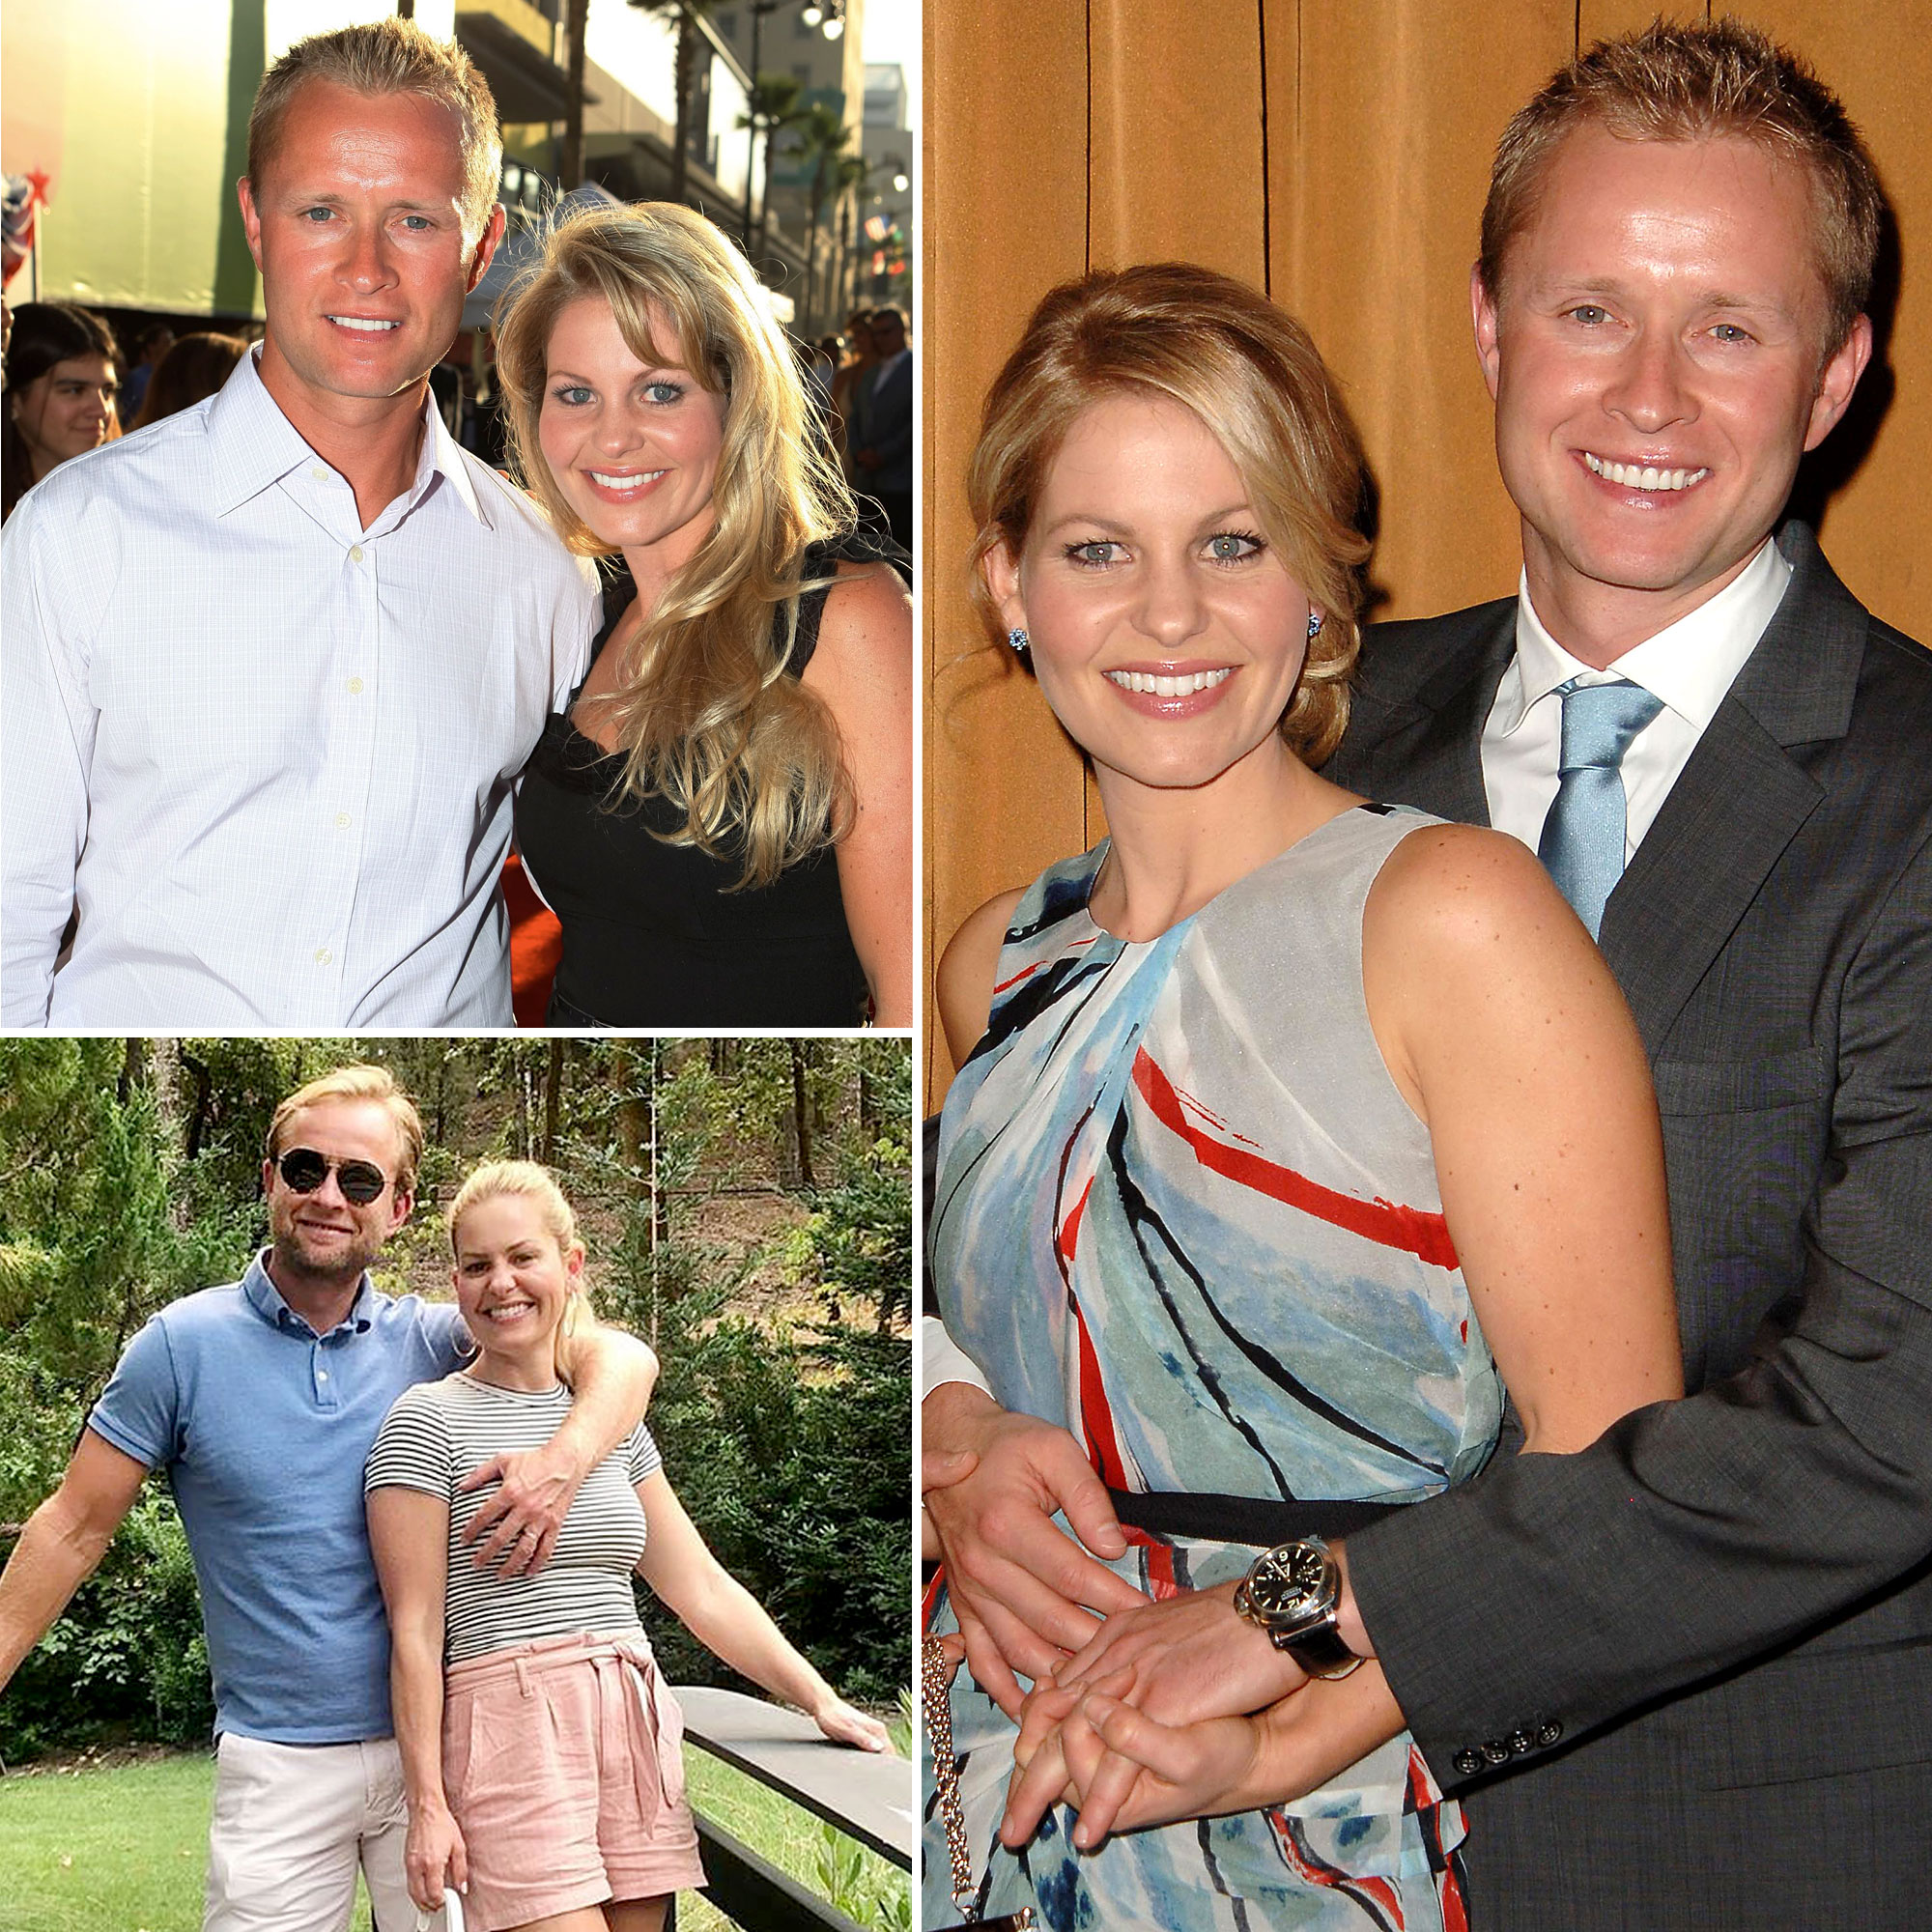 Candace Cameron Bures Quotes About Marriage to Valeri Bure picture